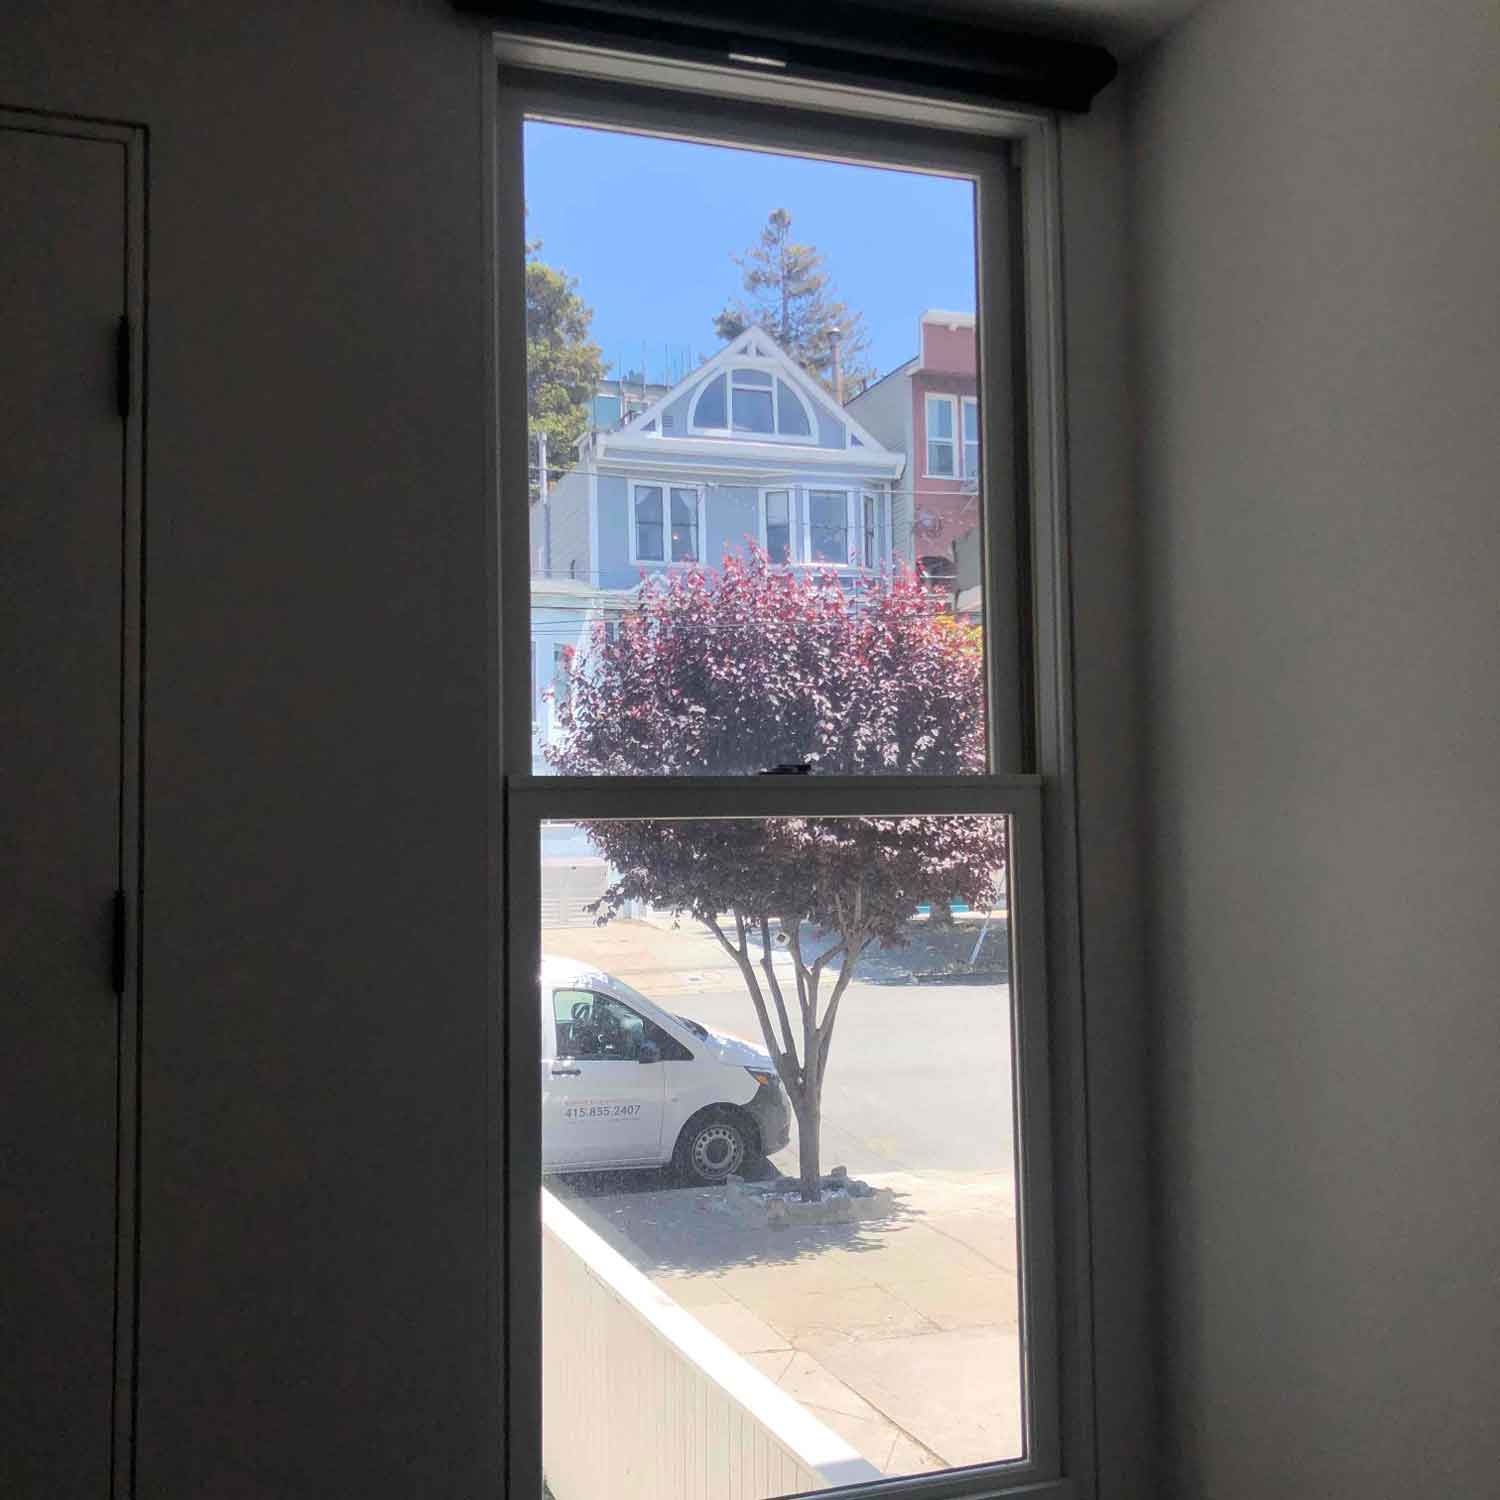 A San Francisco Home made better with window tint, installed by ClimatePro.